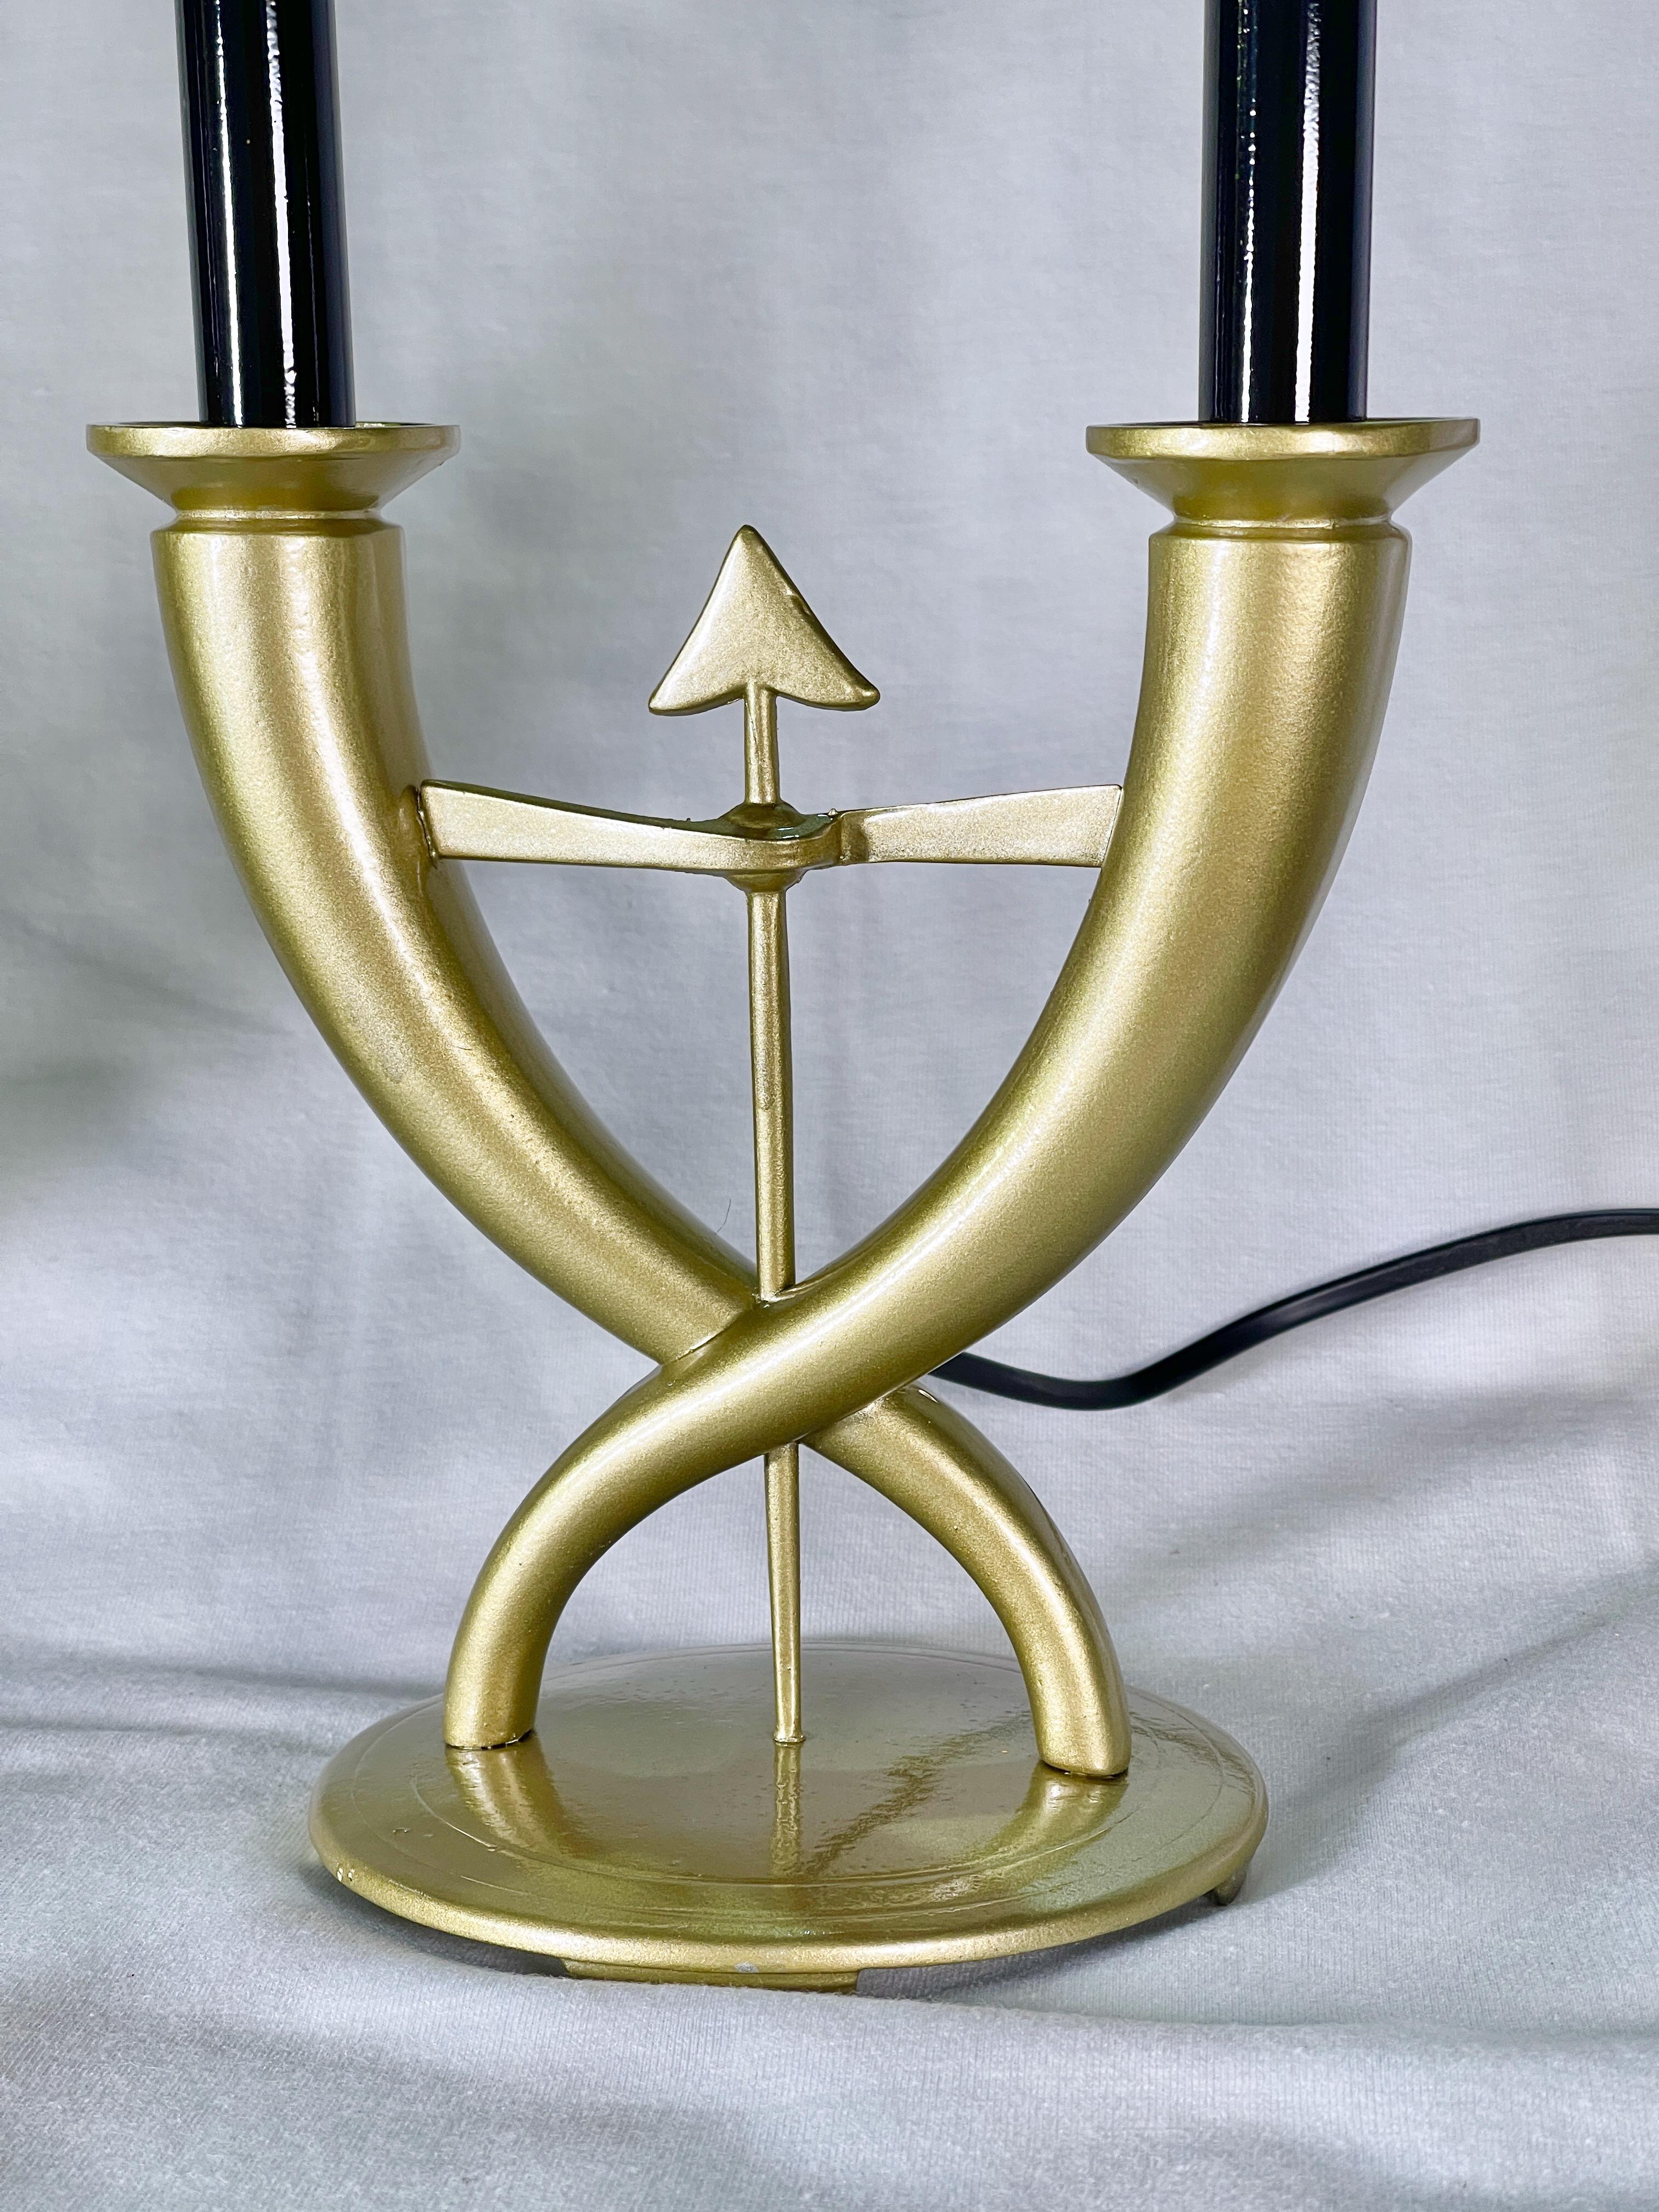 Pair of Gio Ponti Candelabra Fleche Lamps For Sale 1